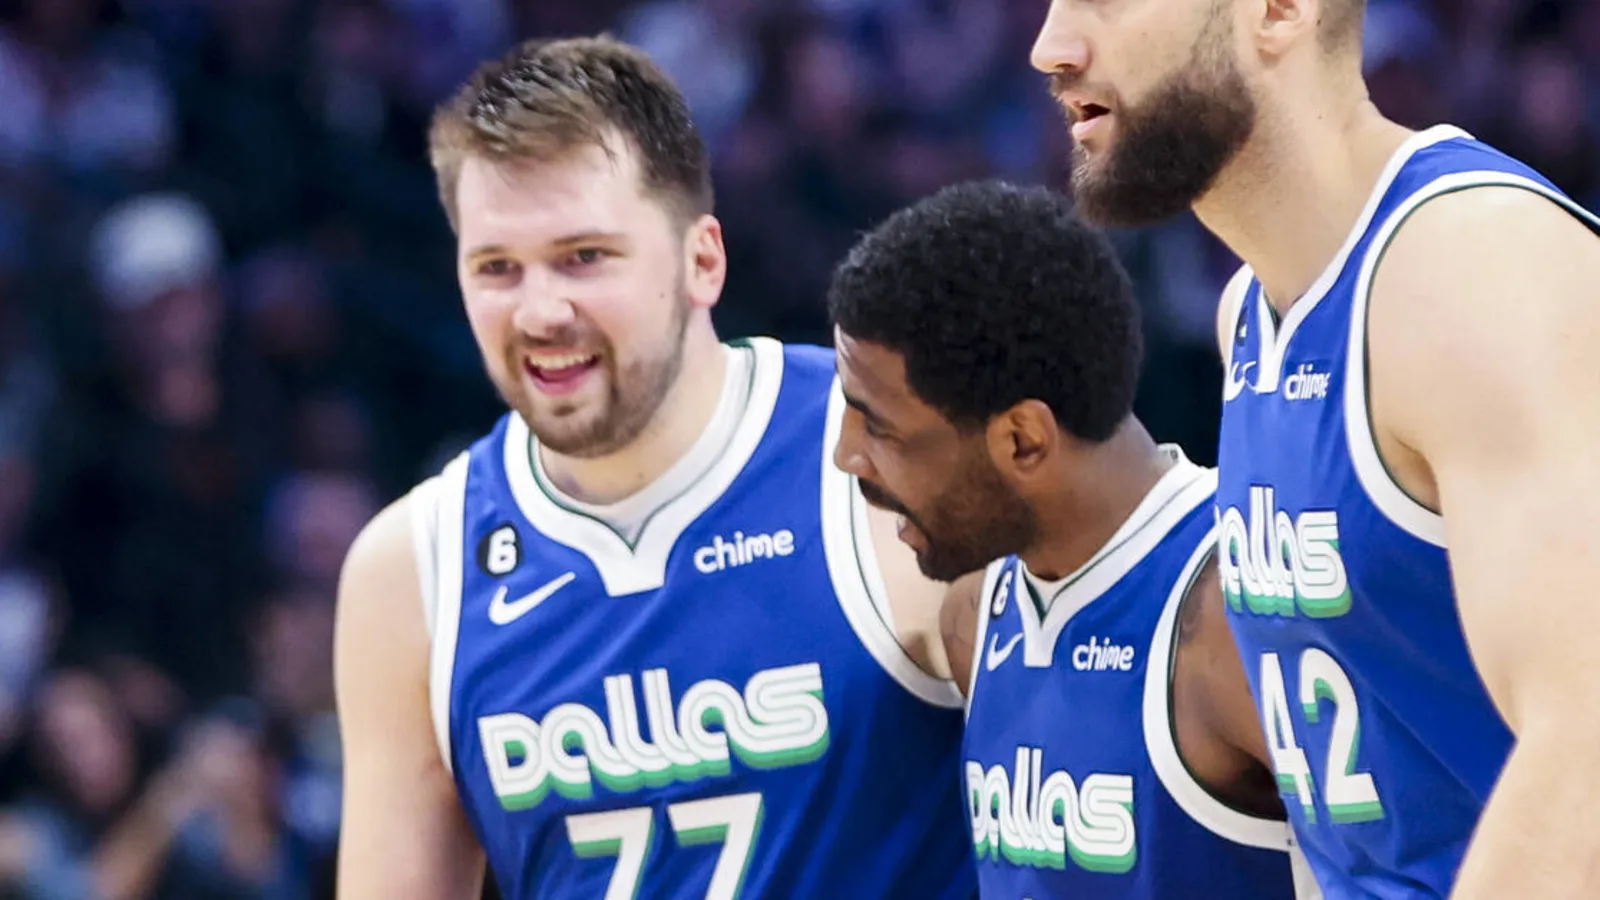 Luka Doncic and Kyrie Irving put up an ELITE duo performance in the 126-133 victory against the Philadelphia 76ers